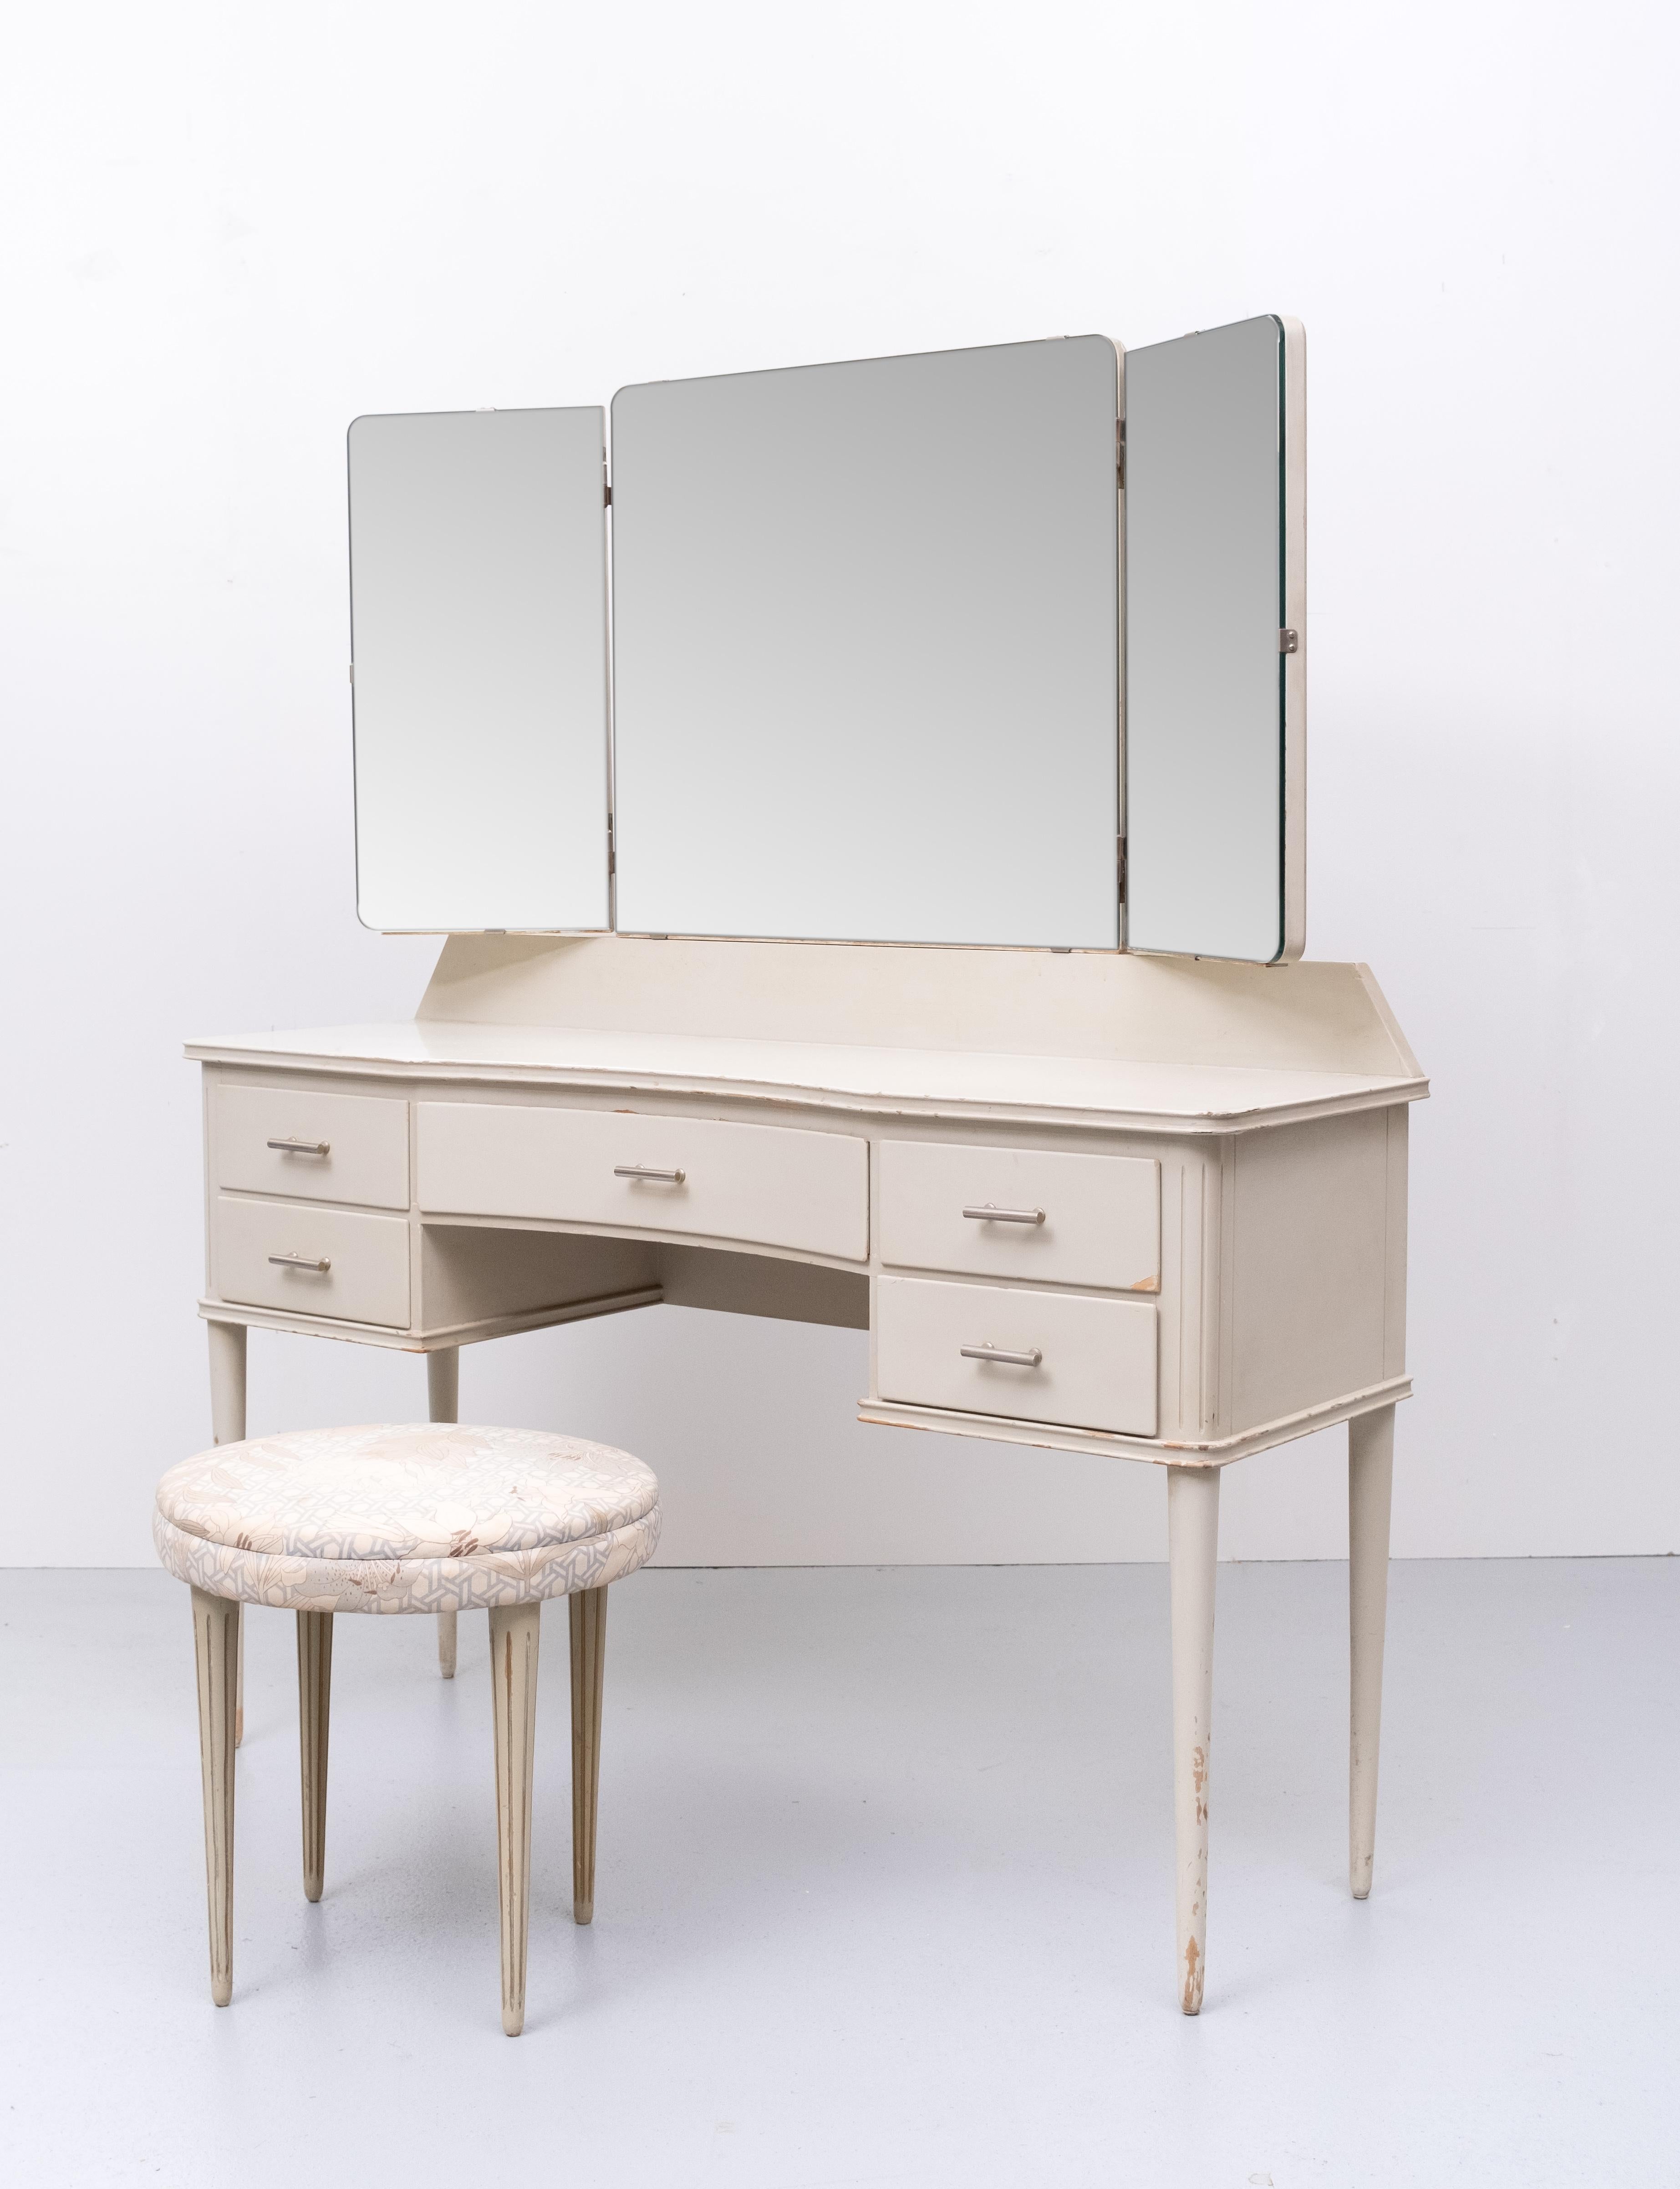 1930s dressing table